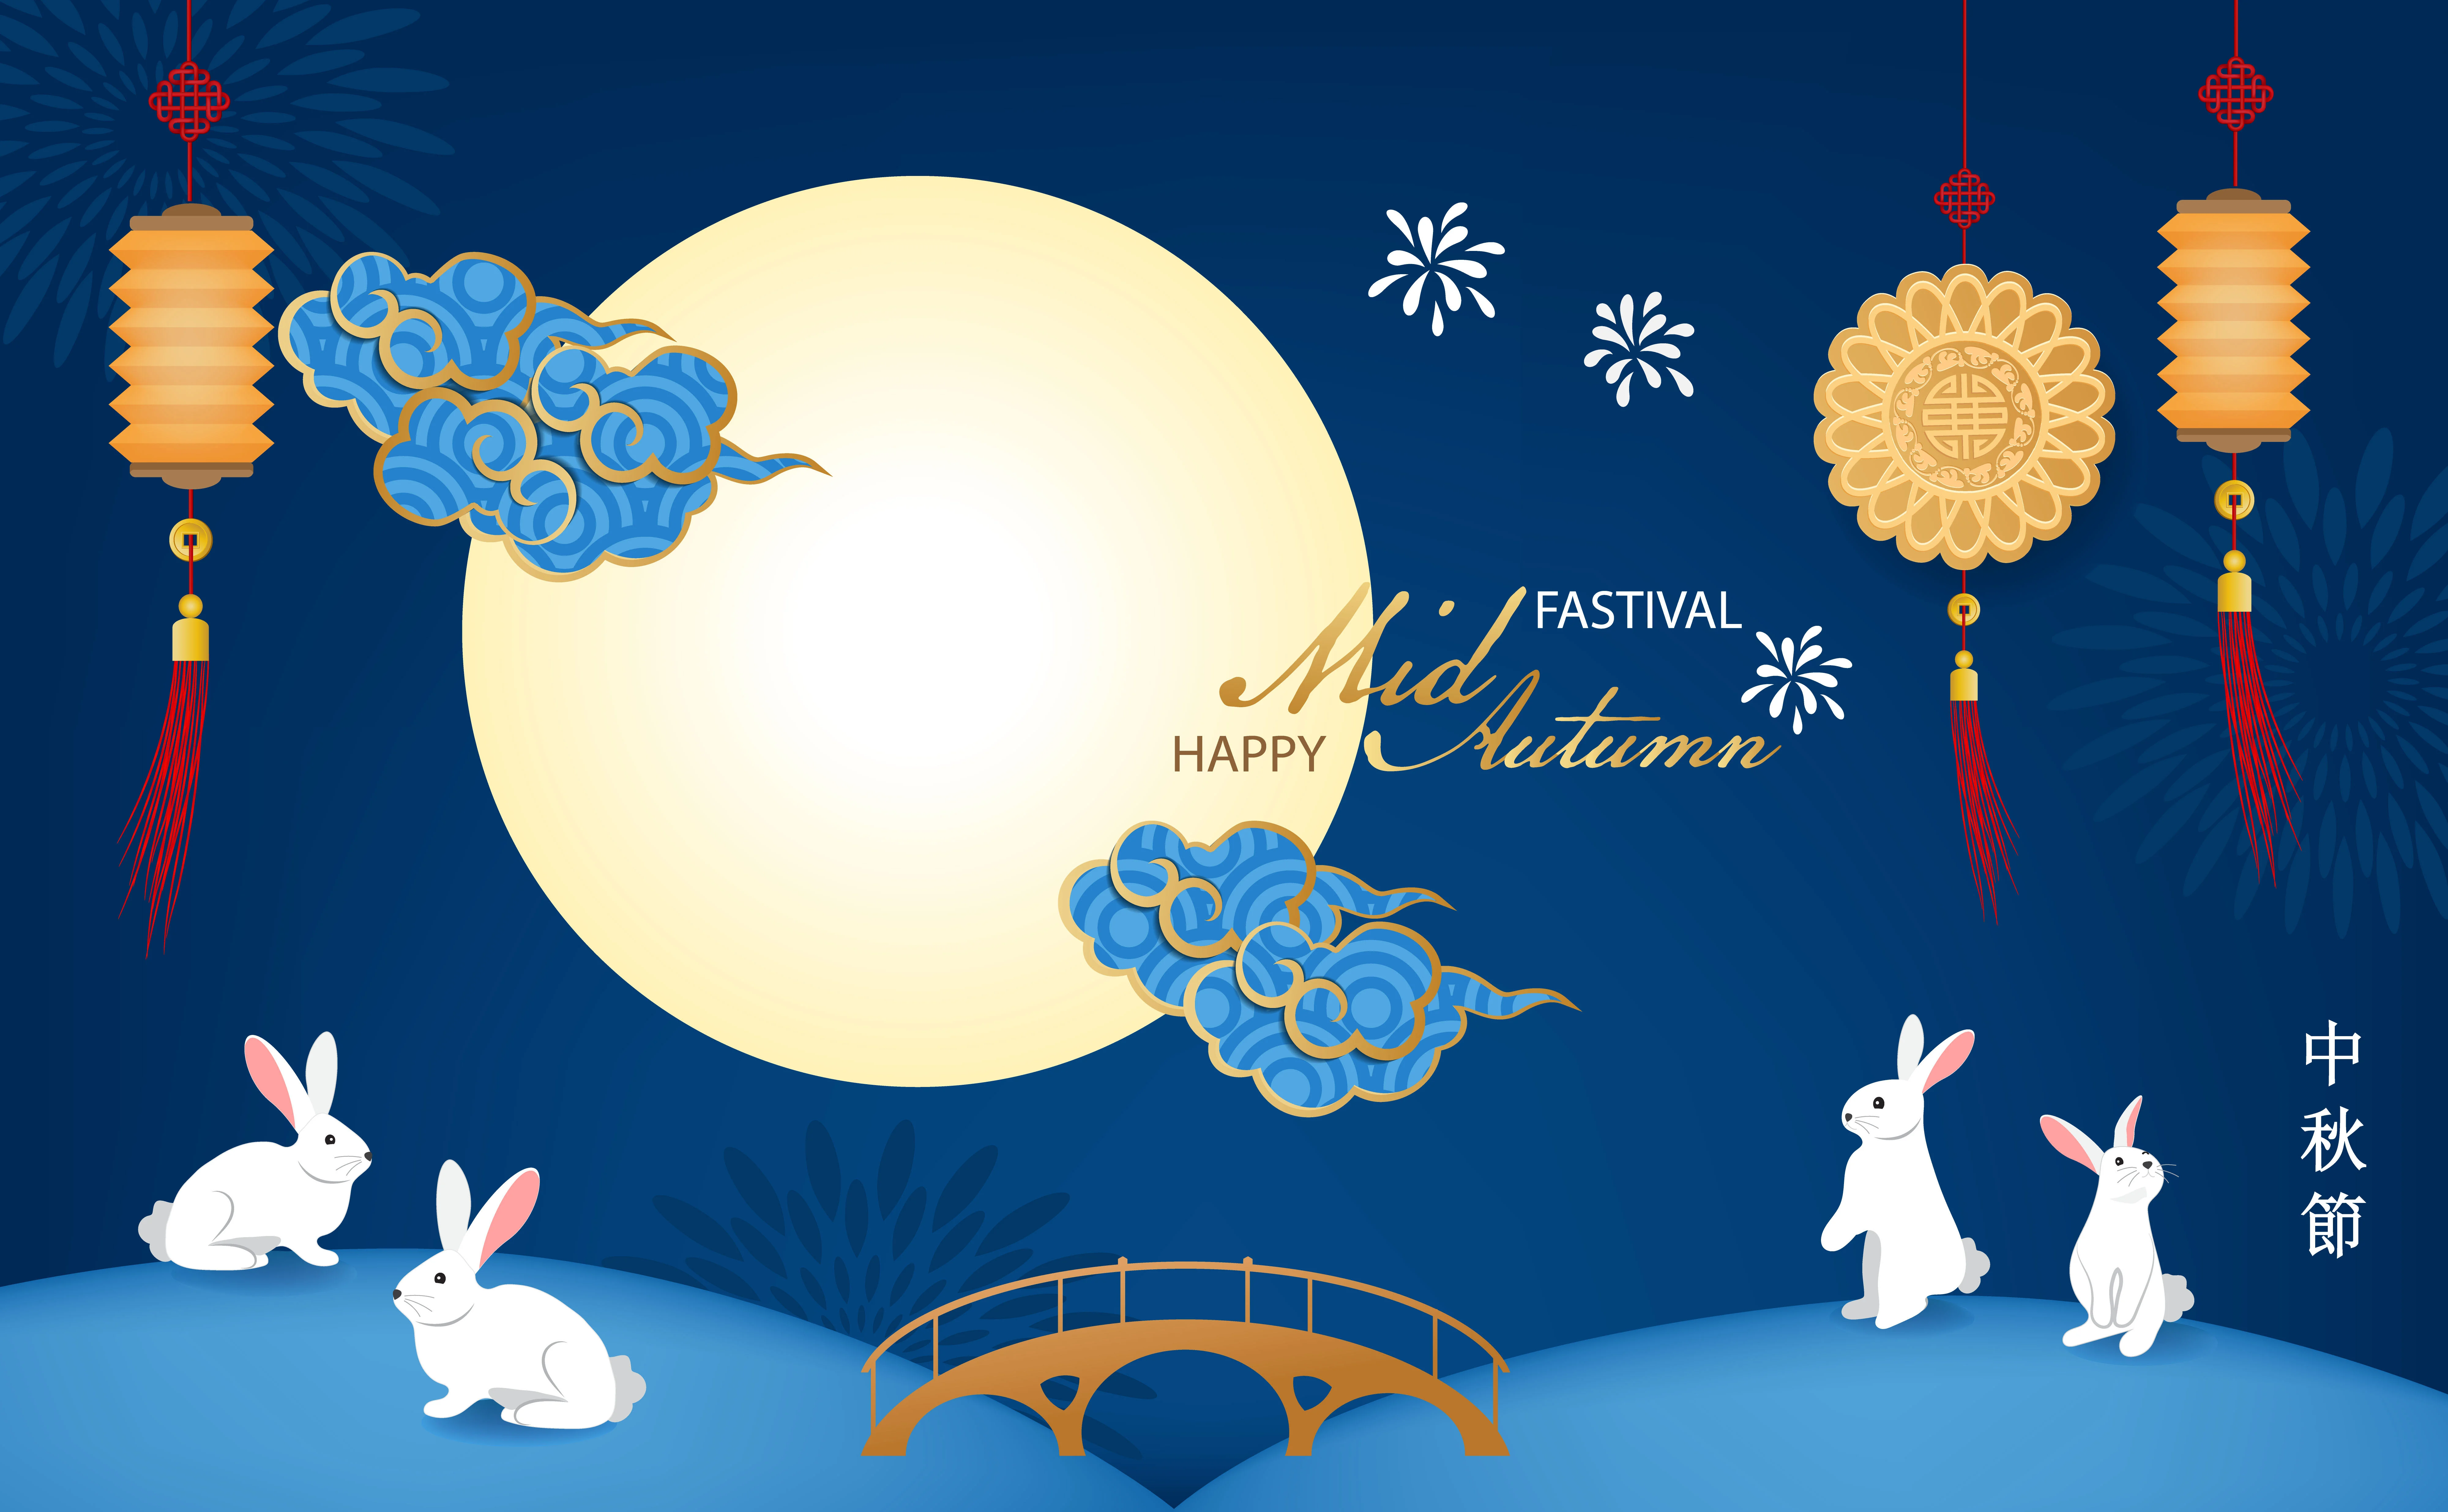 Mid Autumn Festival HD Wallpaper And Background